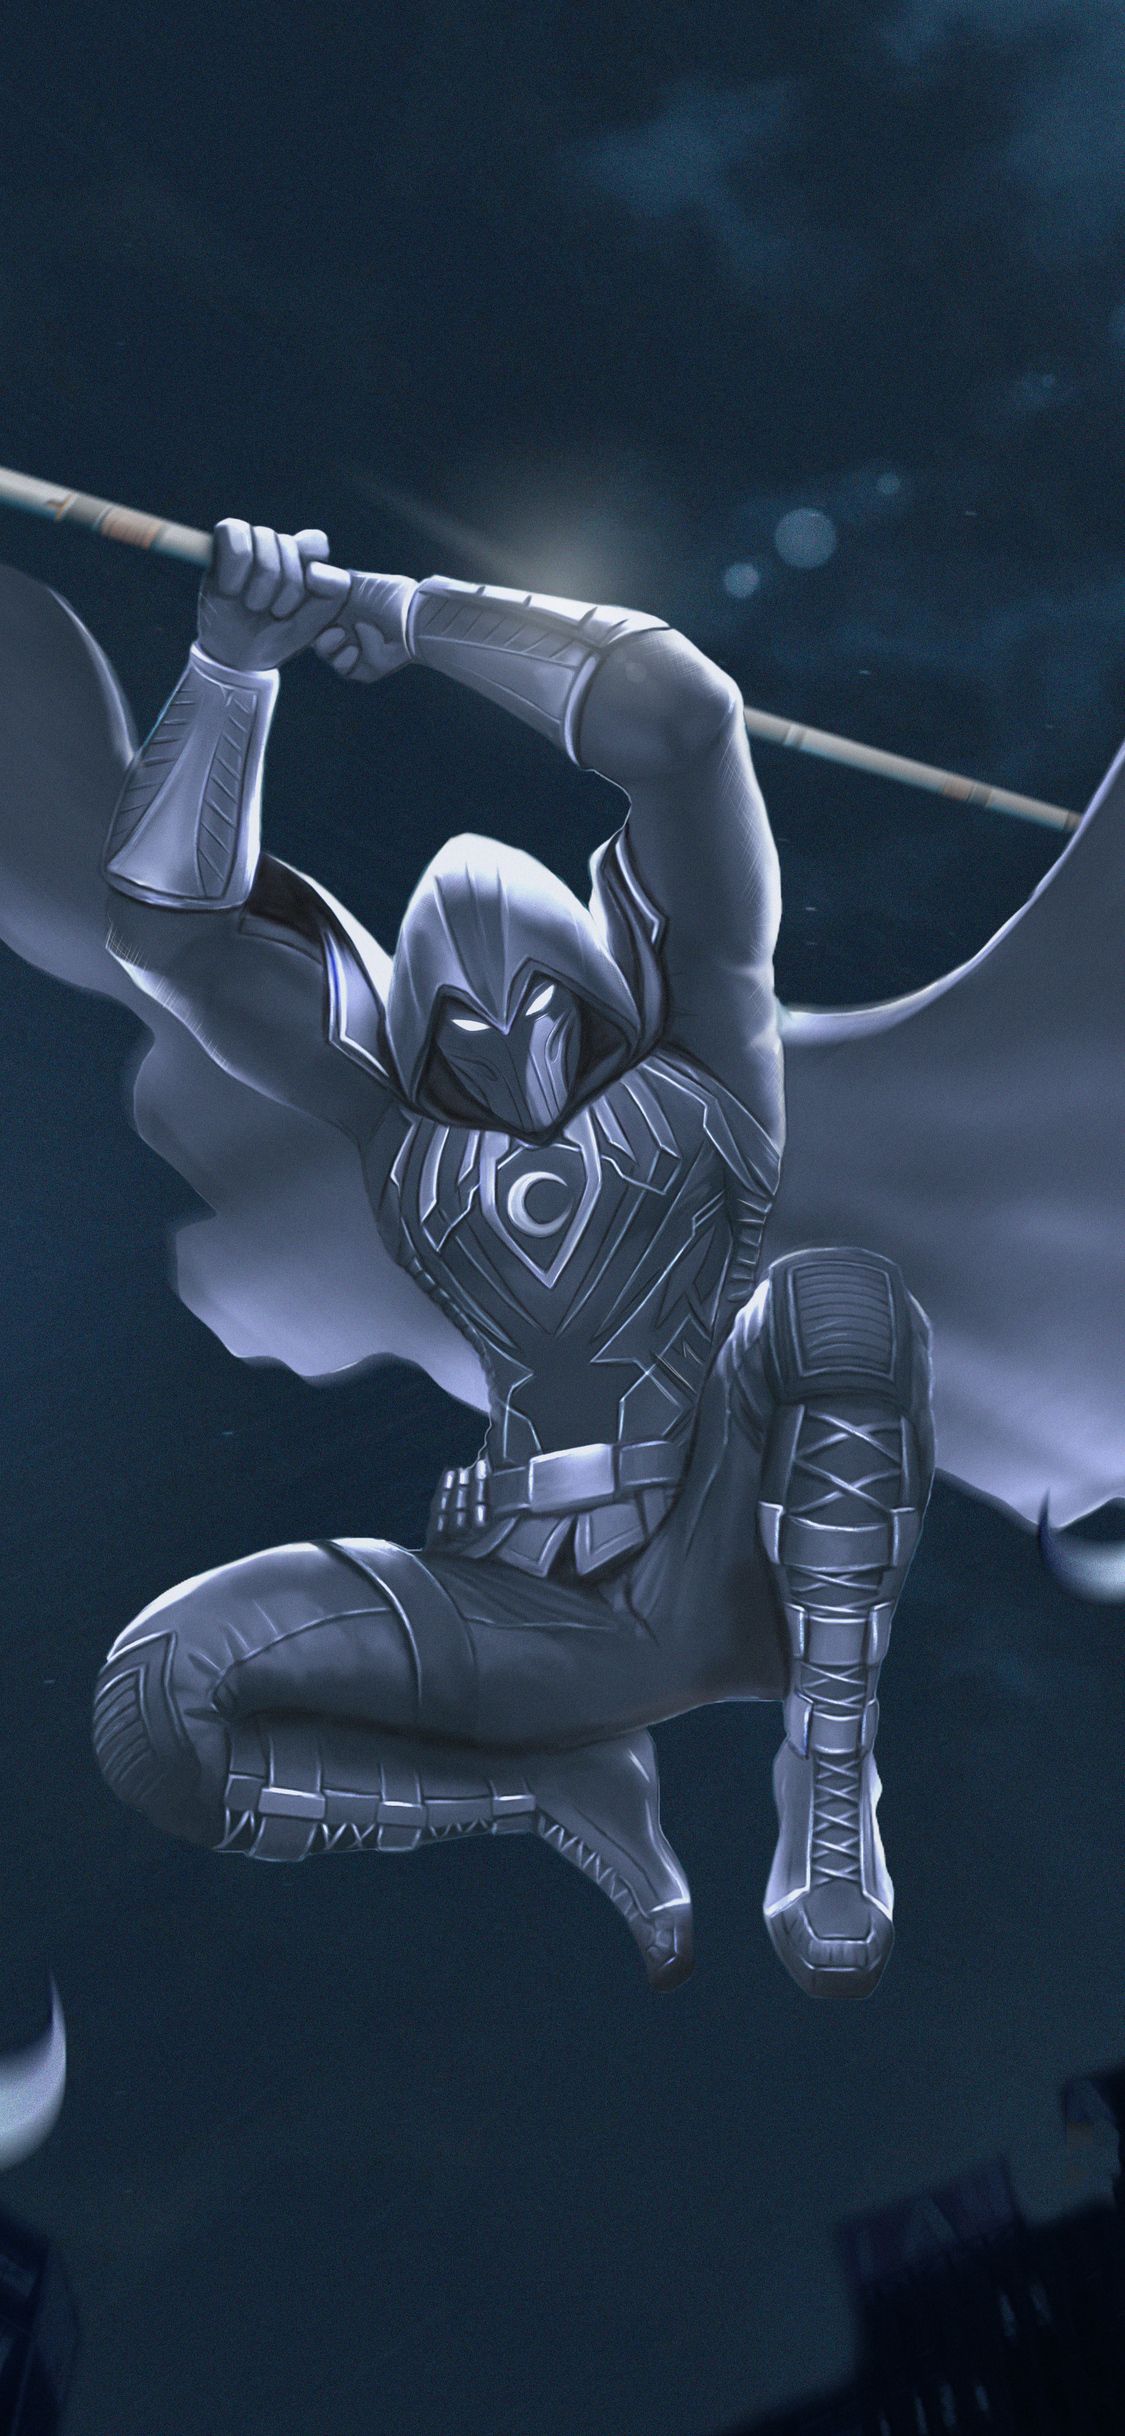 Moonknight 4k Mobile Wallpapers - Wallpaper Cave